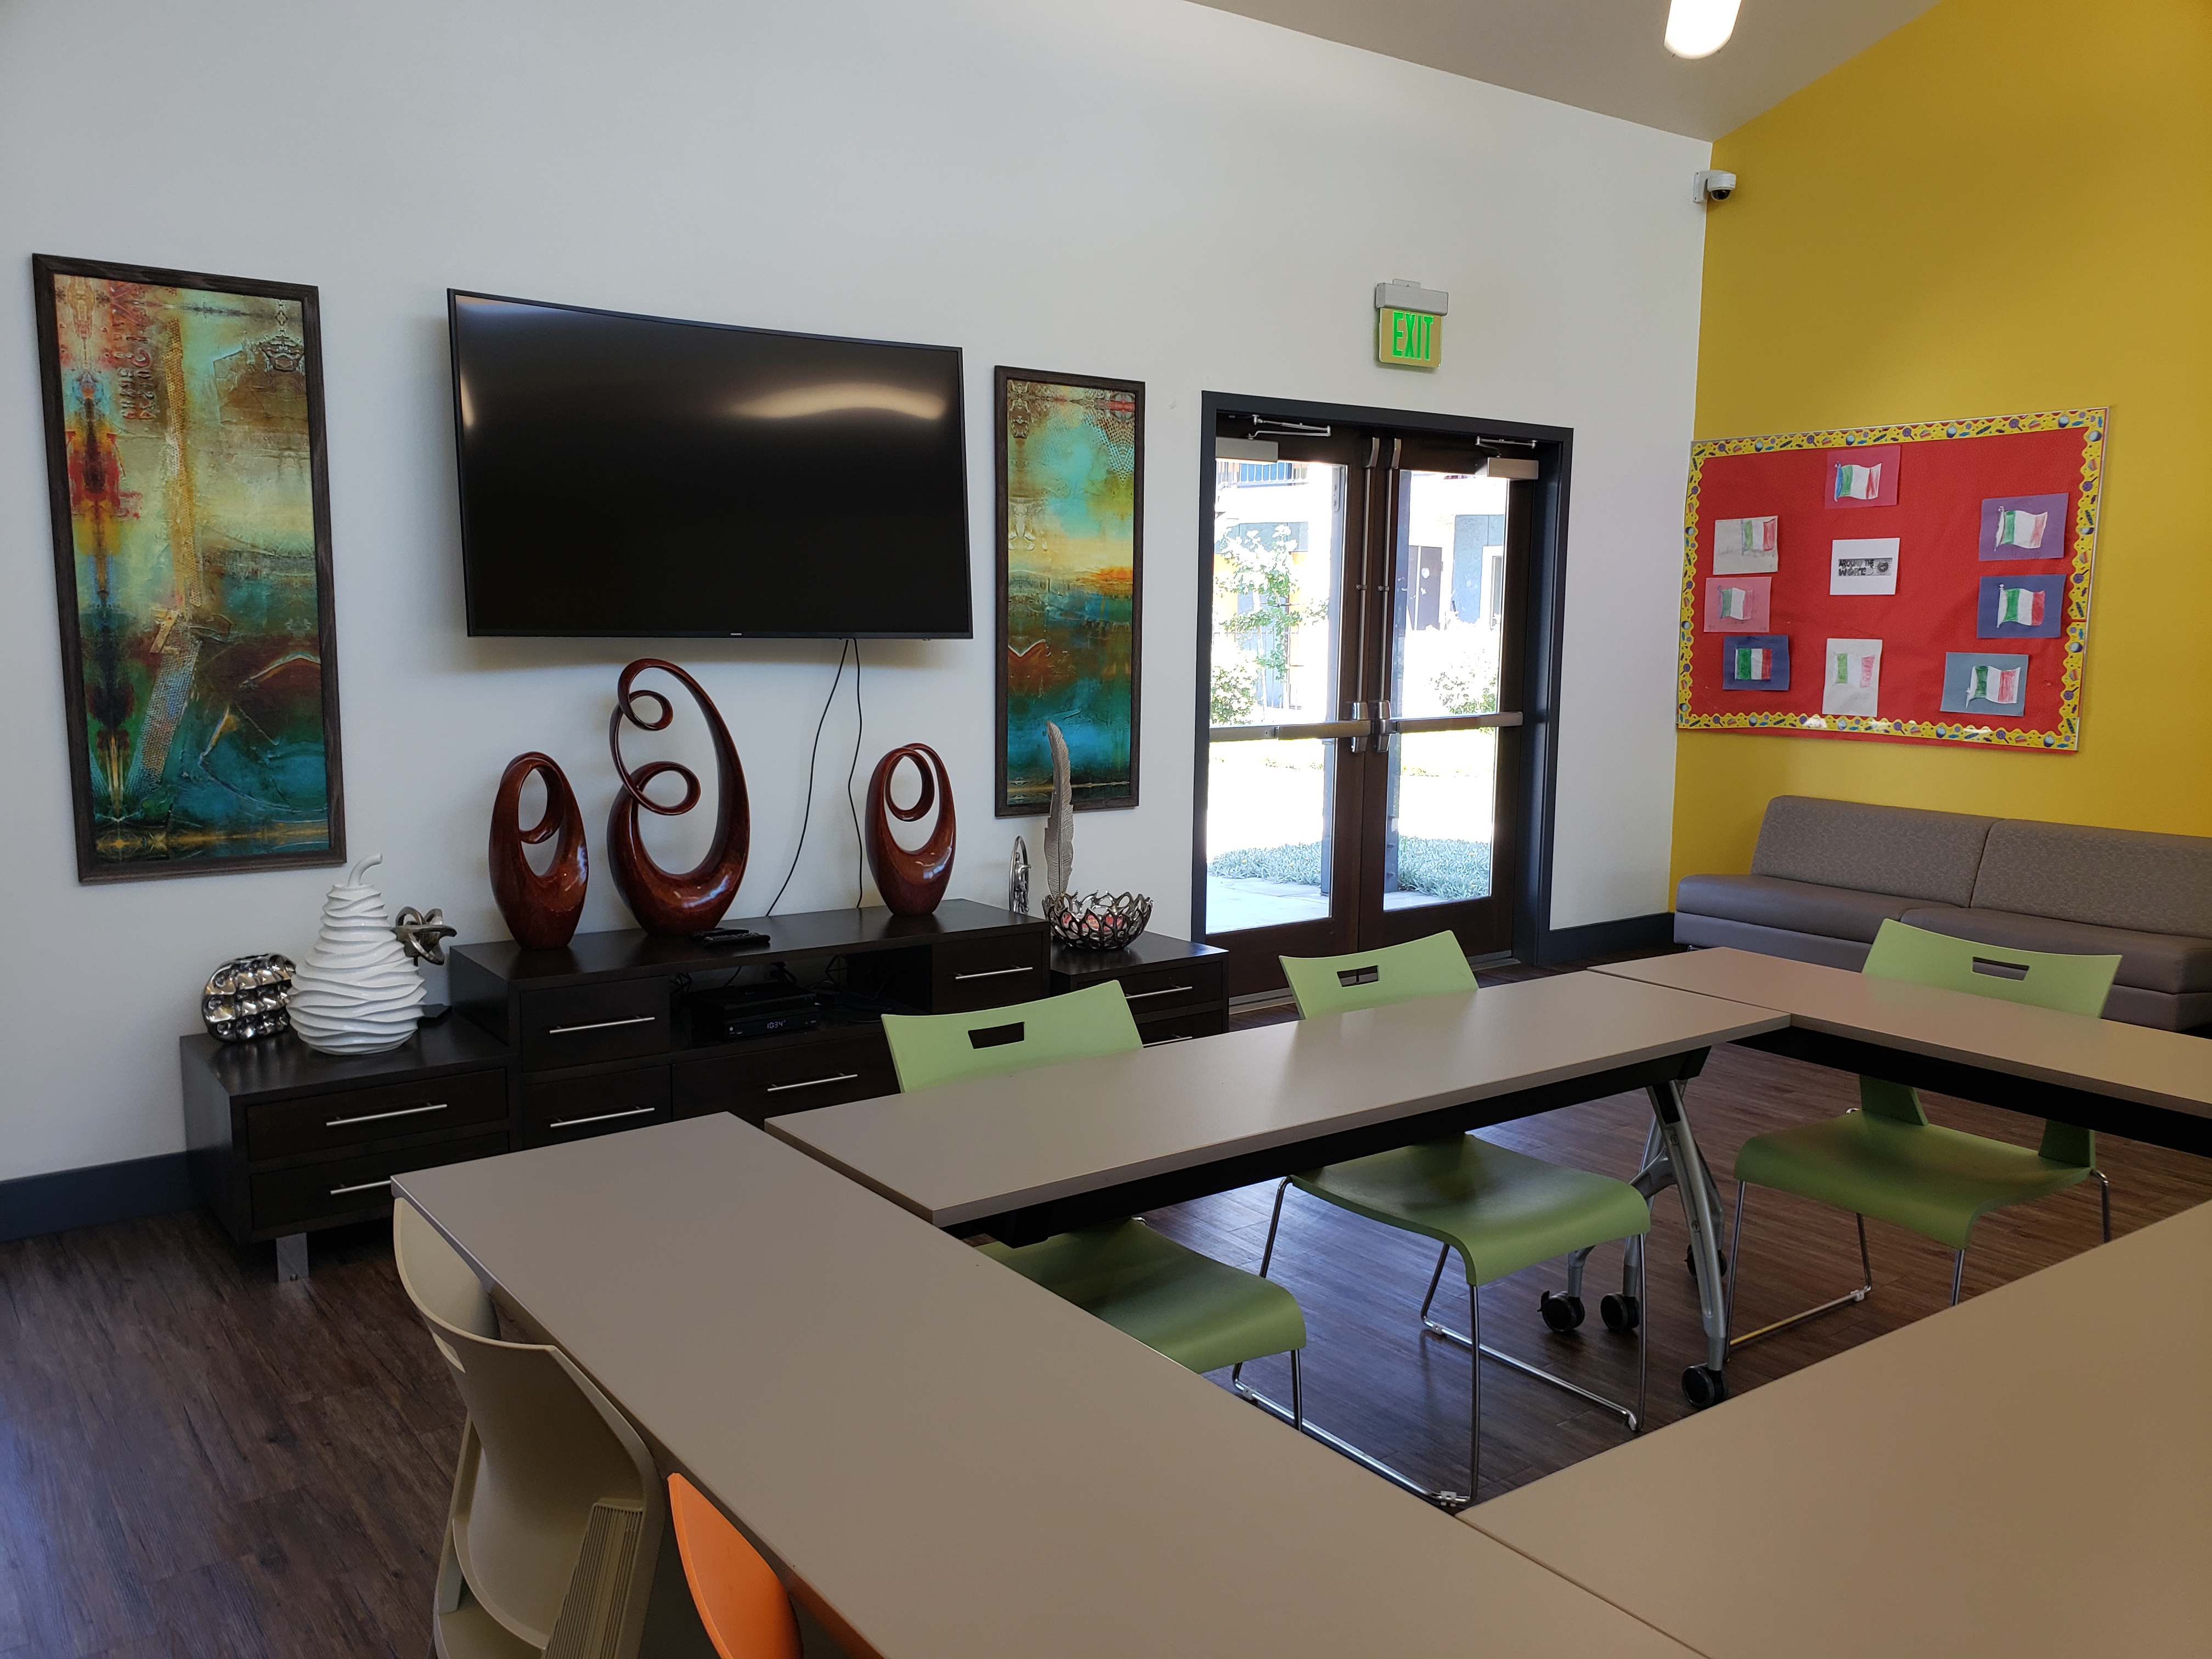 Interior view of a community room with double door ground level entry. Room consists of a small sofa, flat screen tv on the wall, tables and chairs, and modern art decor. Tables are set up to face each other in a rectangular pattern.